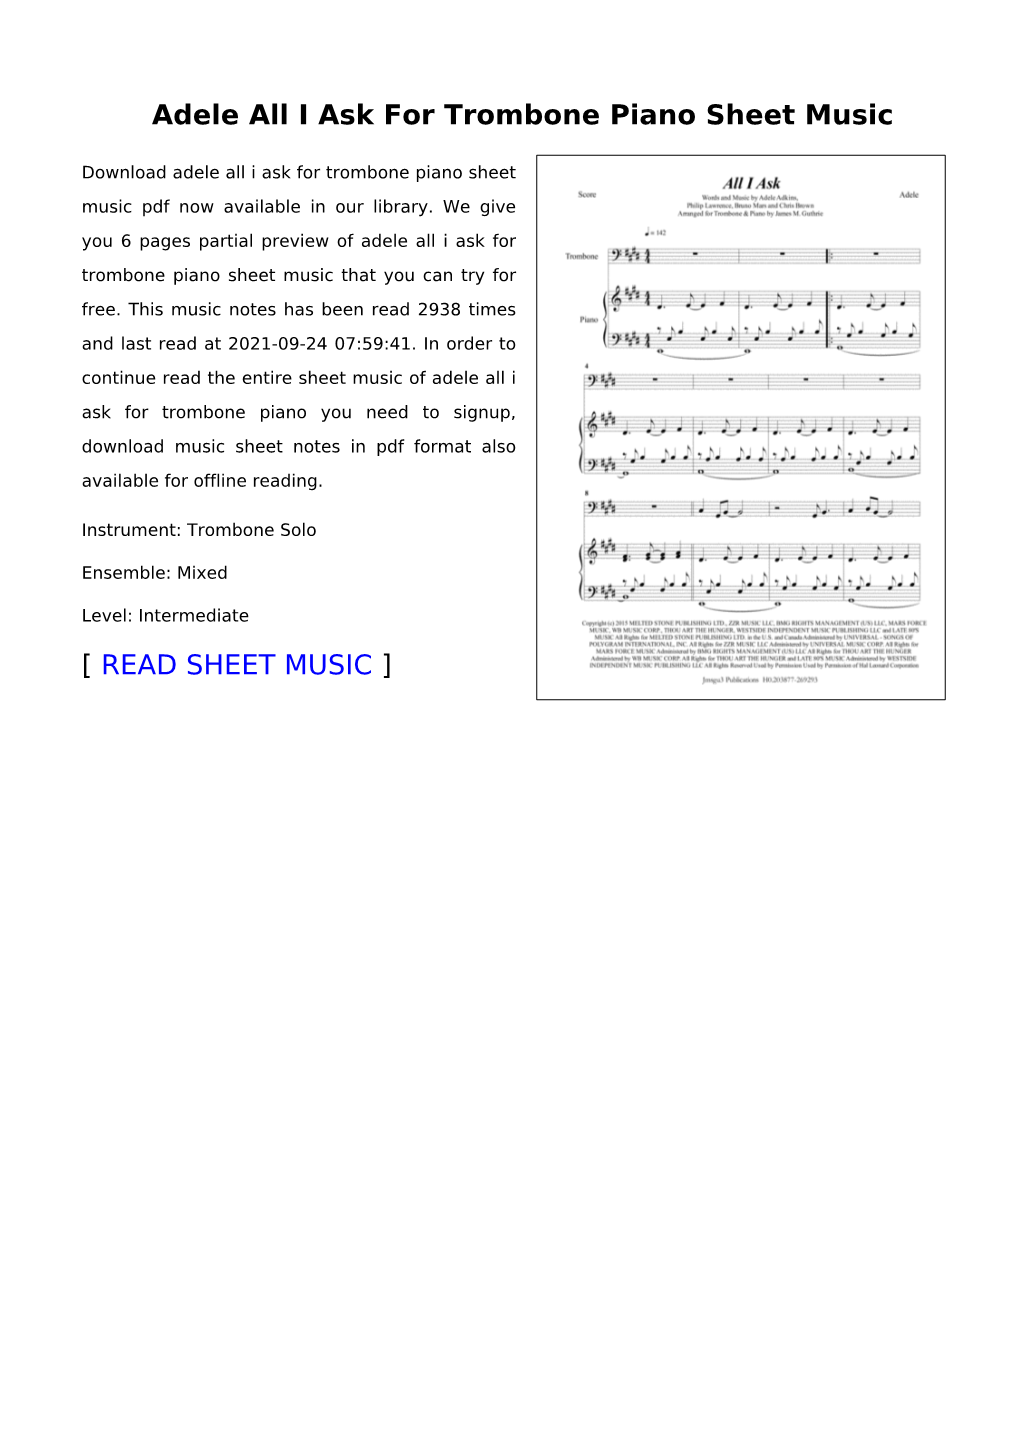 Adele All I Ask for Trombone Piano Sheet Music